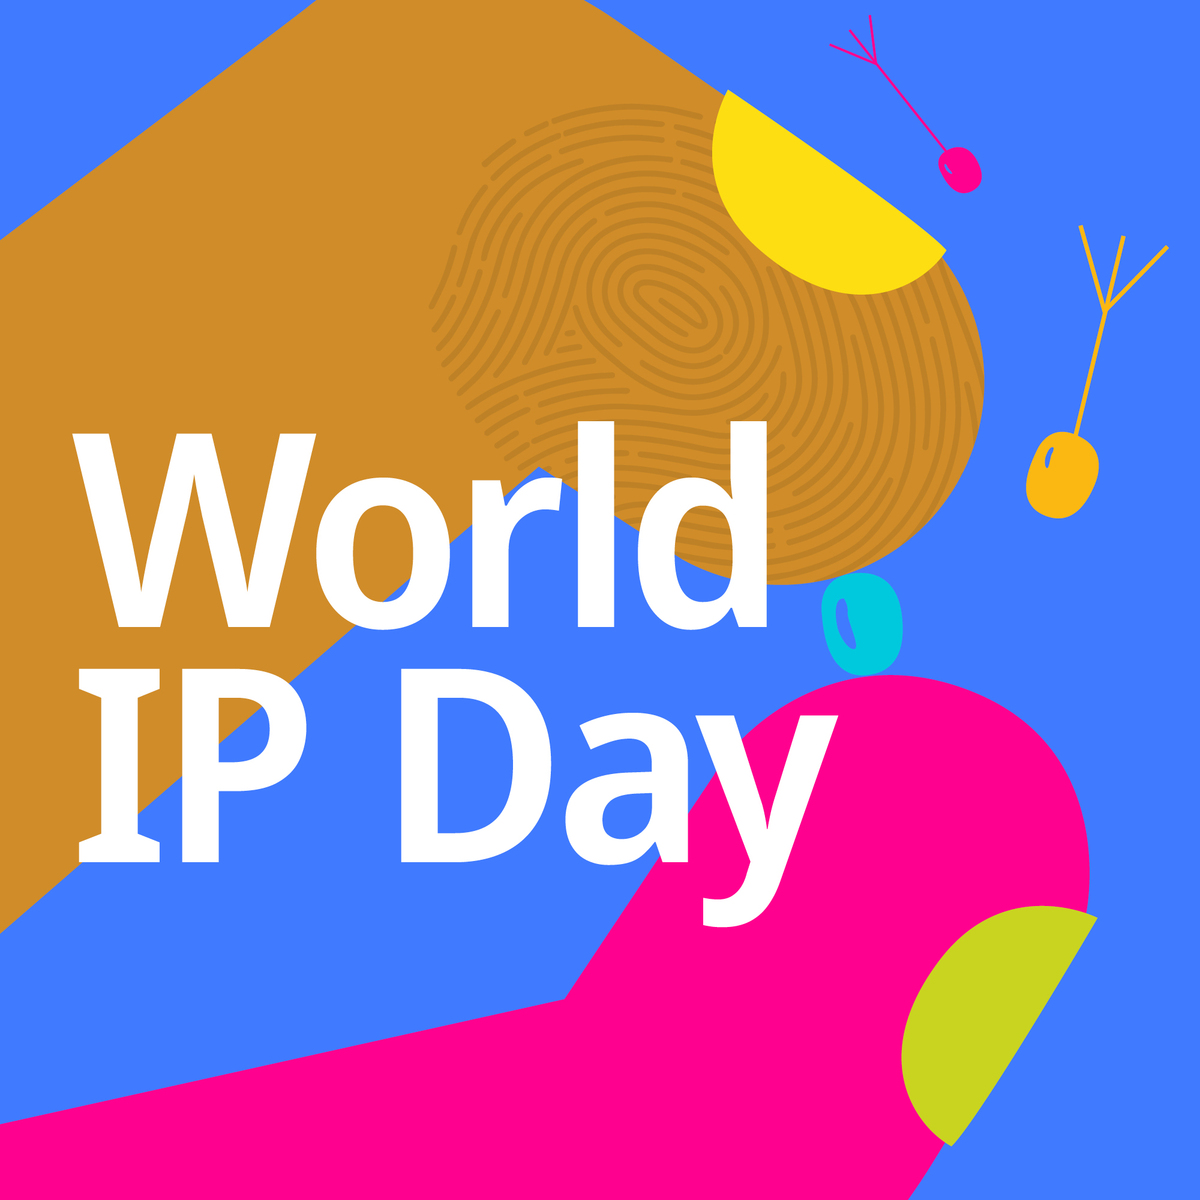 'It’s no exaggeration to say that IP can save the world.' Happy #WorldIPDay! From plant-based pet food to electric aircrafts, our new blog explores how IP can help us on the path to a sustainable future. 🐾✈️ Read now: rb.gy/zuvsdx @WIPO